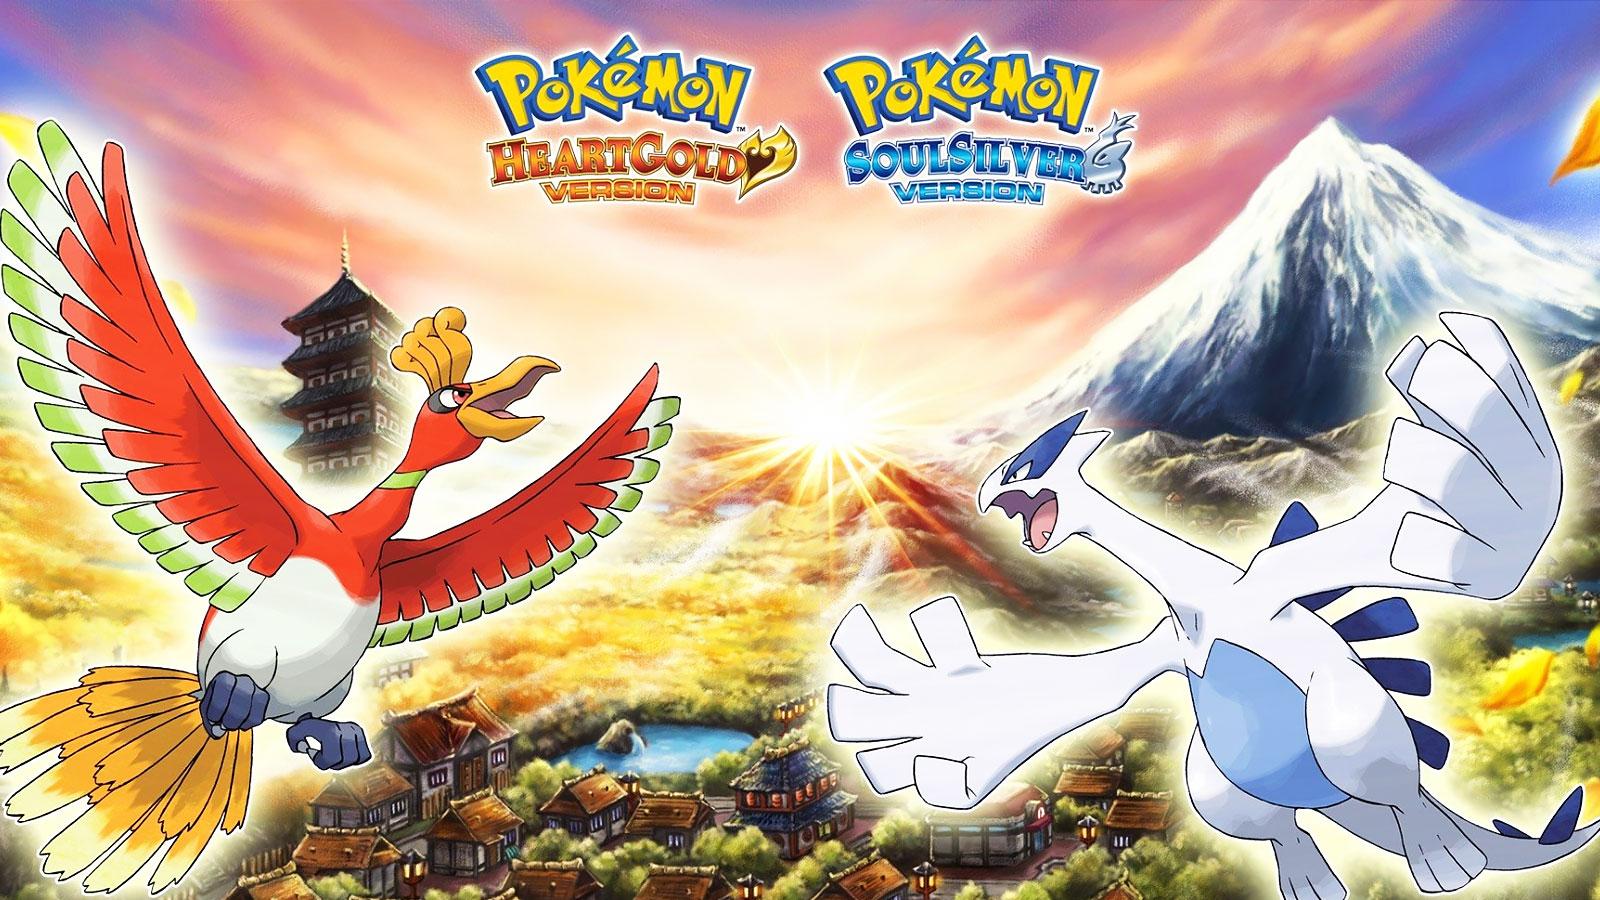 Nintendo Files Pokemon HeartGold And SoulSilver Trademarks, But That  Doesn't Mean New Games Are Coming - GameSpot